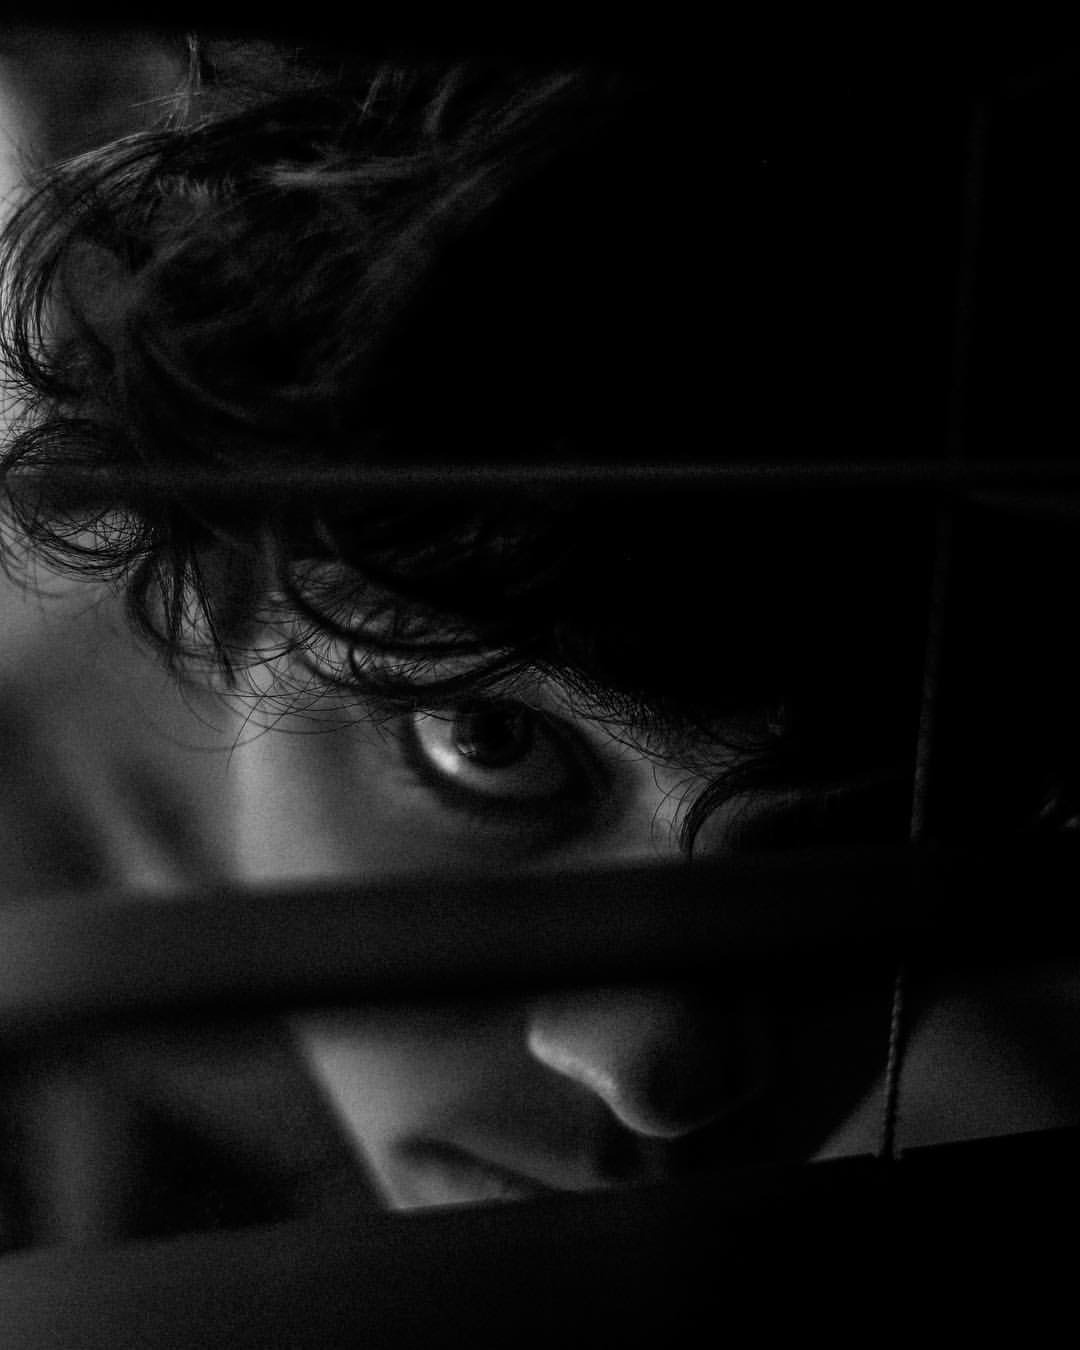 ncentineosource: Noah Centineo photographed by Jorden Keith (2018)